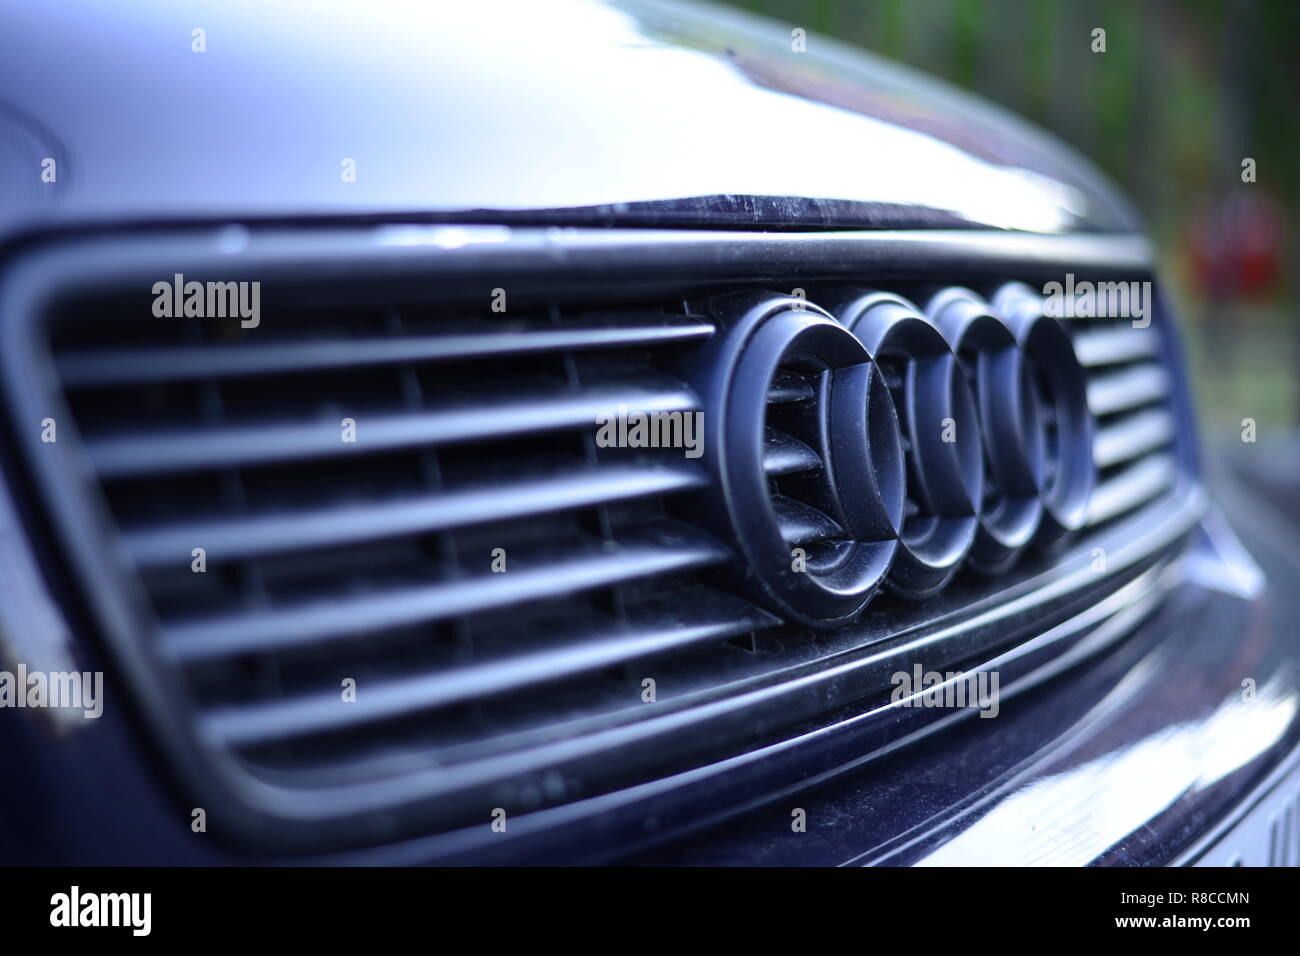 Audi A4 B5 High Resolution Stock Photography and Images - Alamy